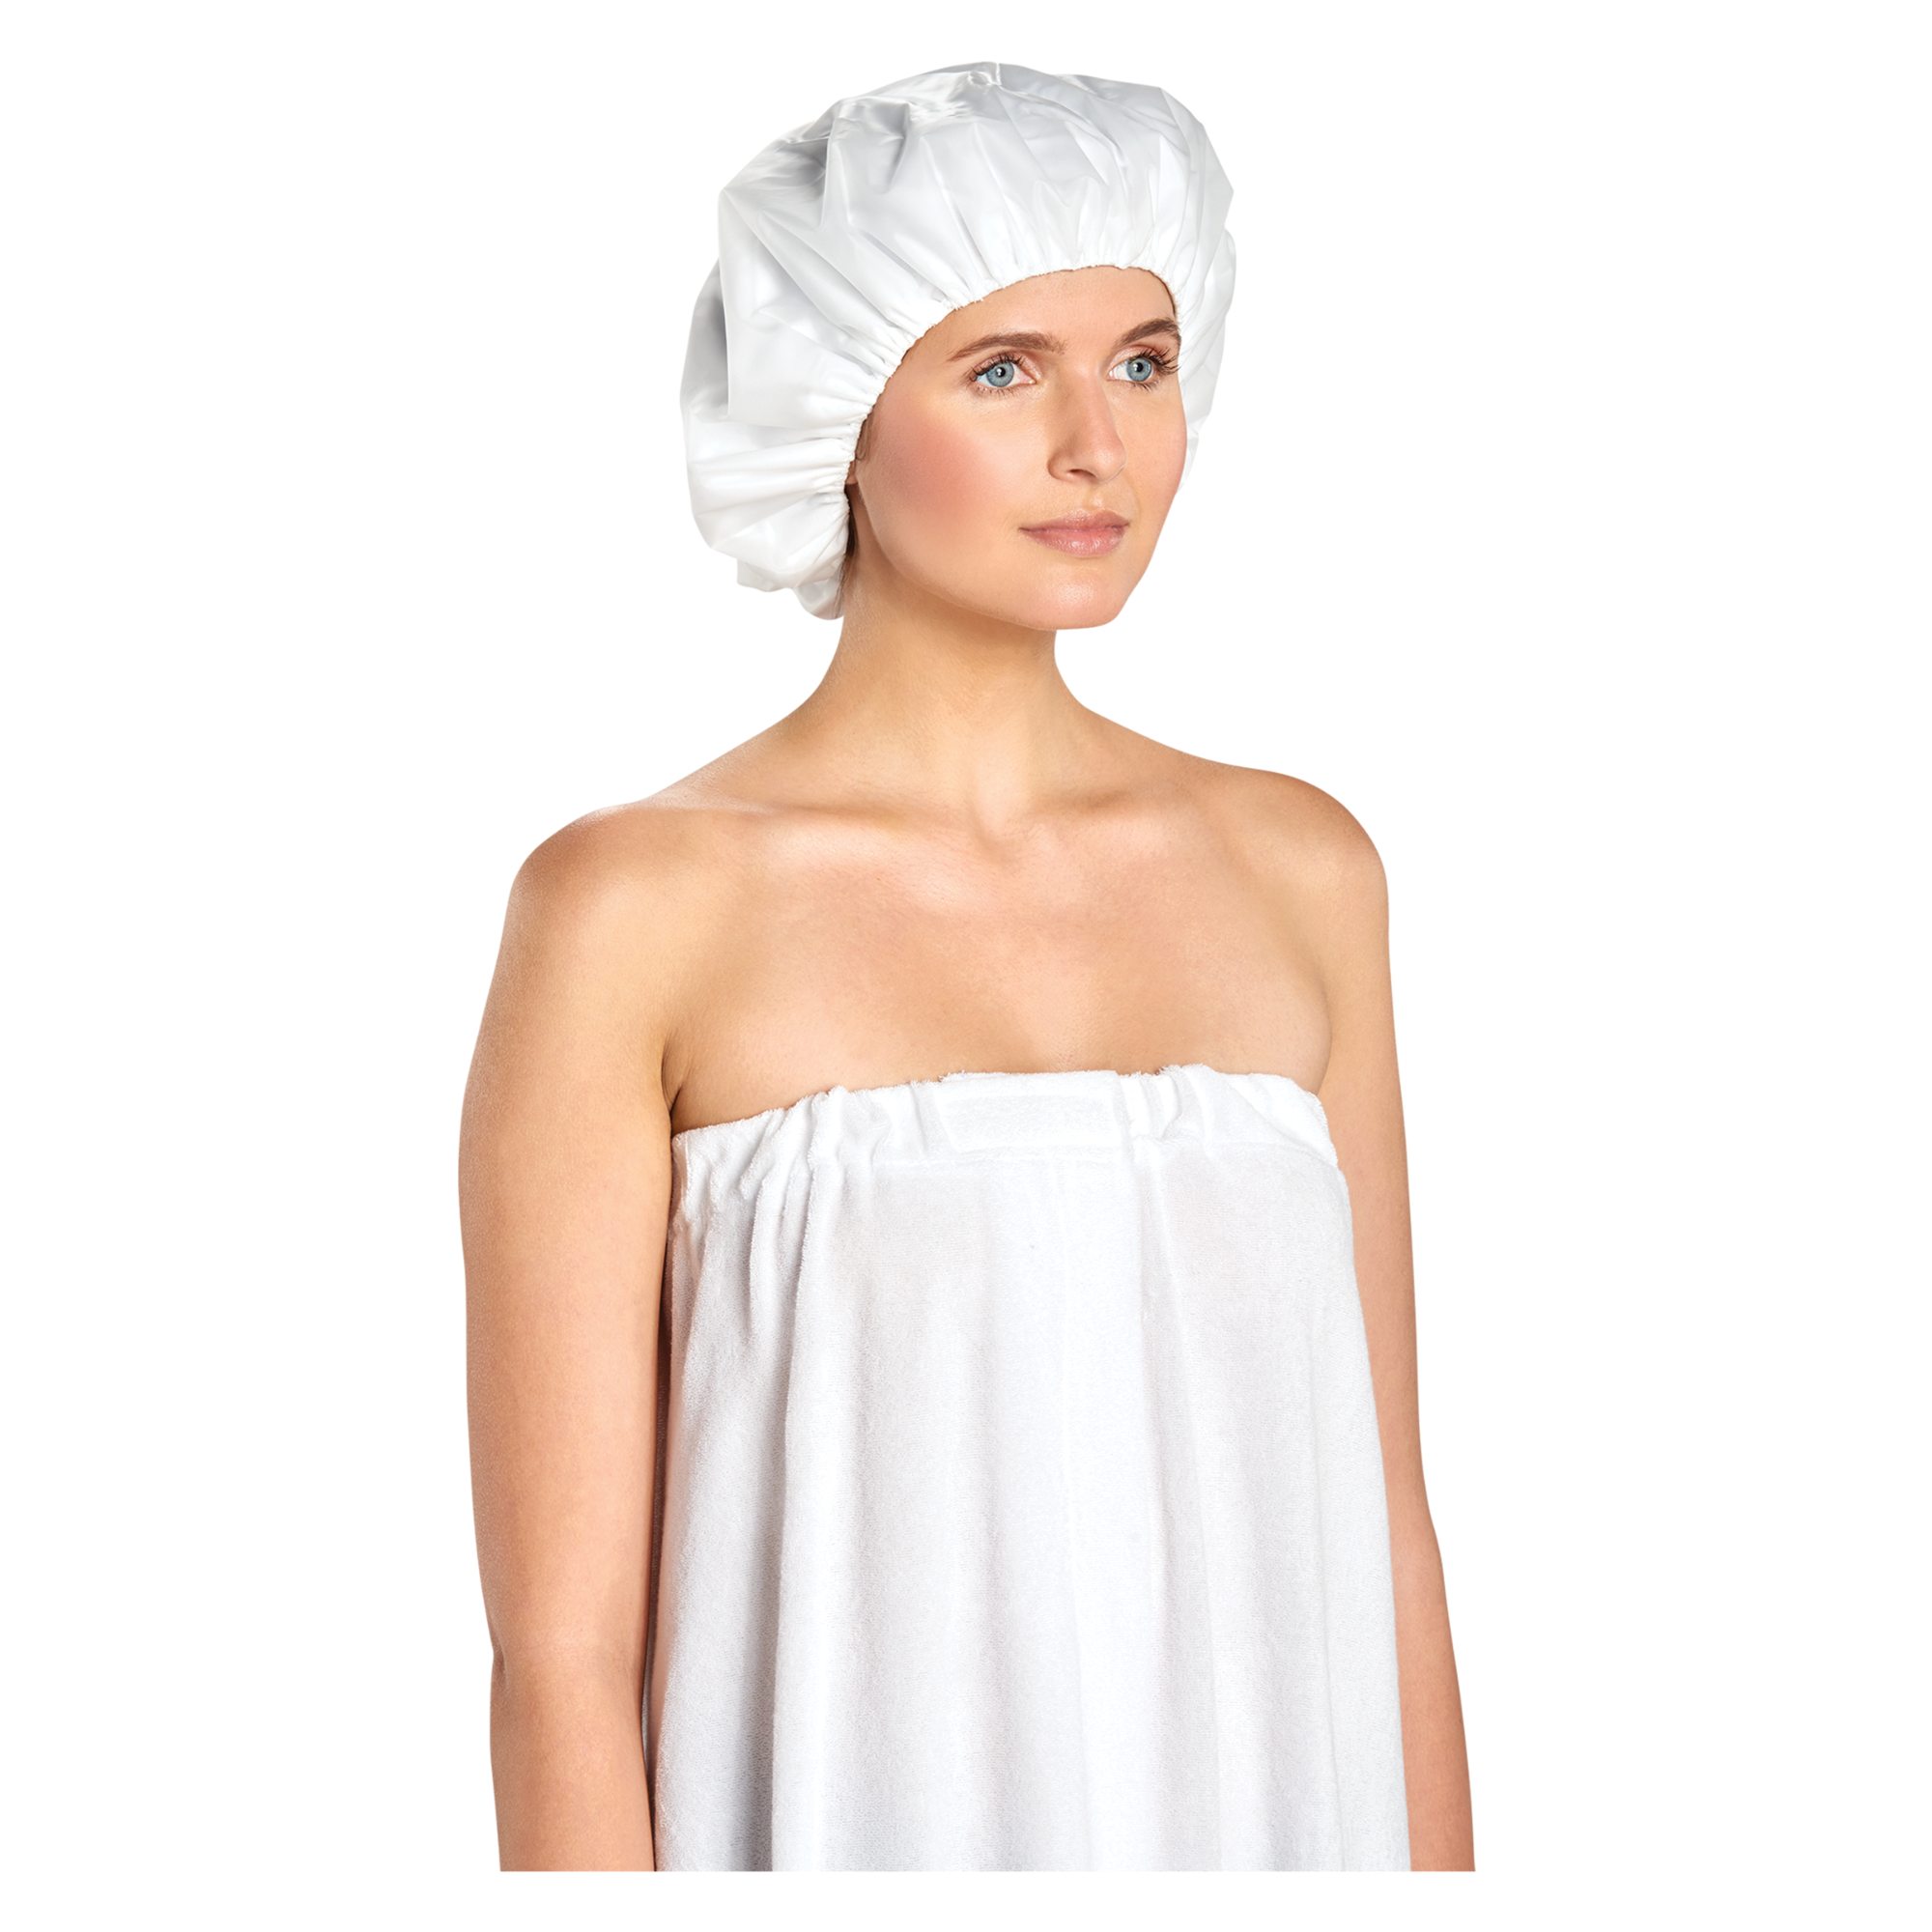 Vinyl Shower Cap, Terry Cloth Lined, Assorted Colors